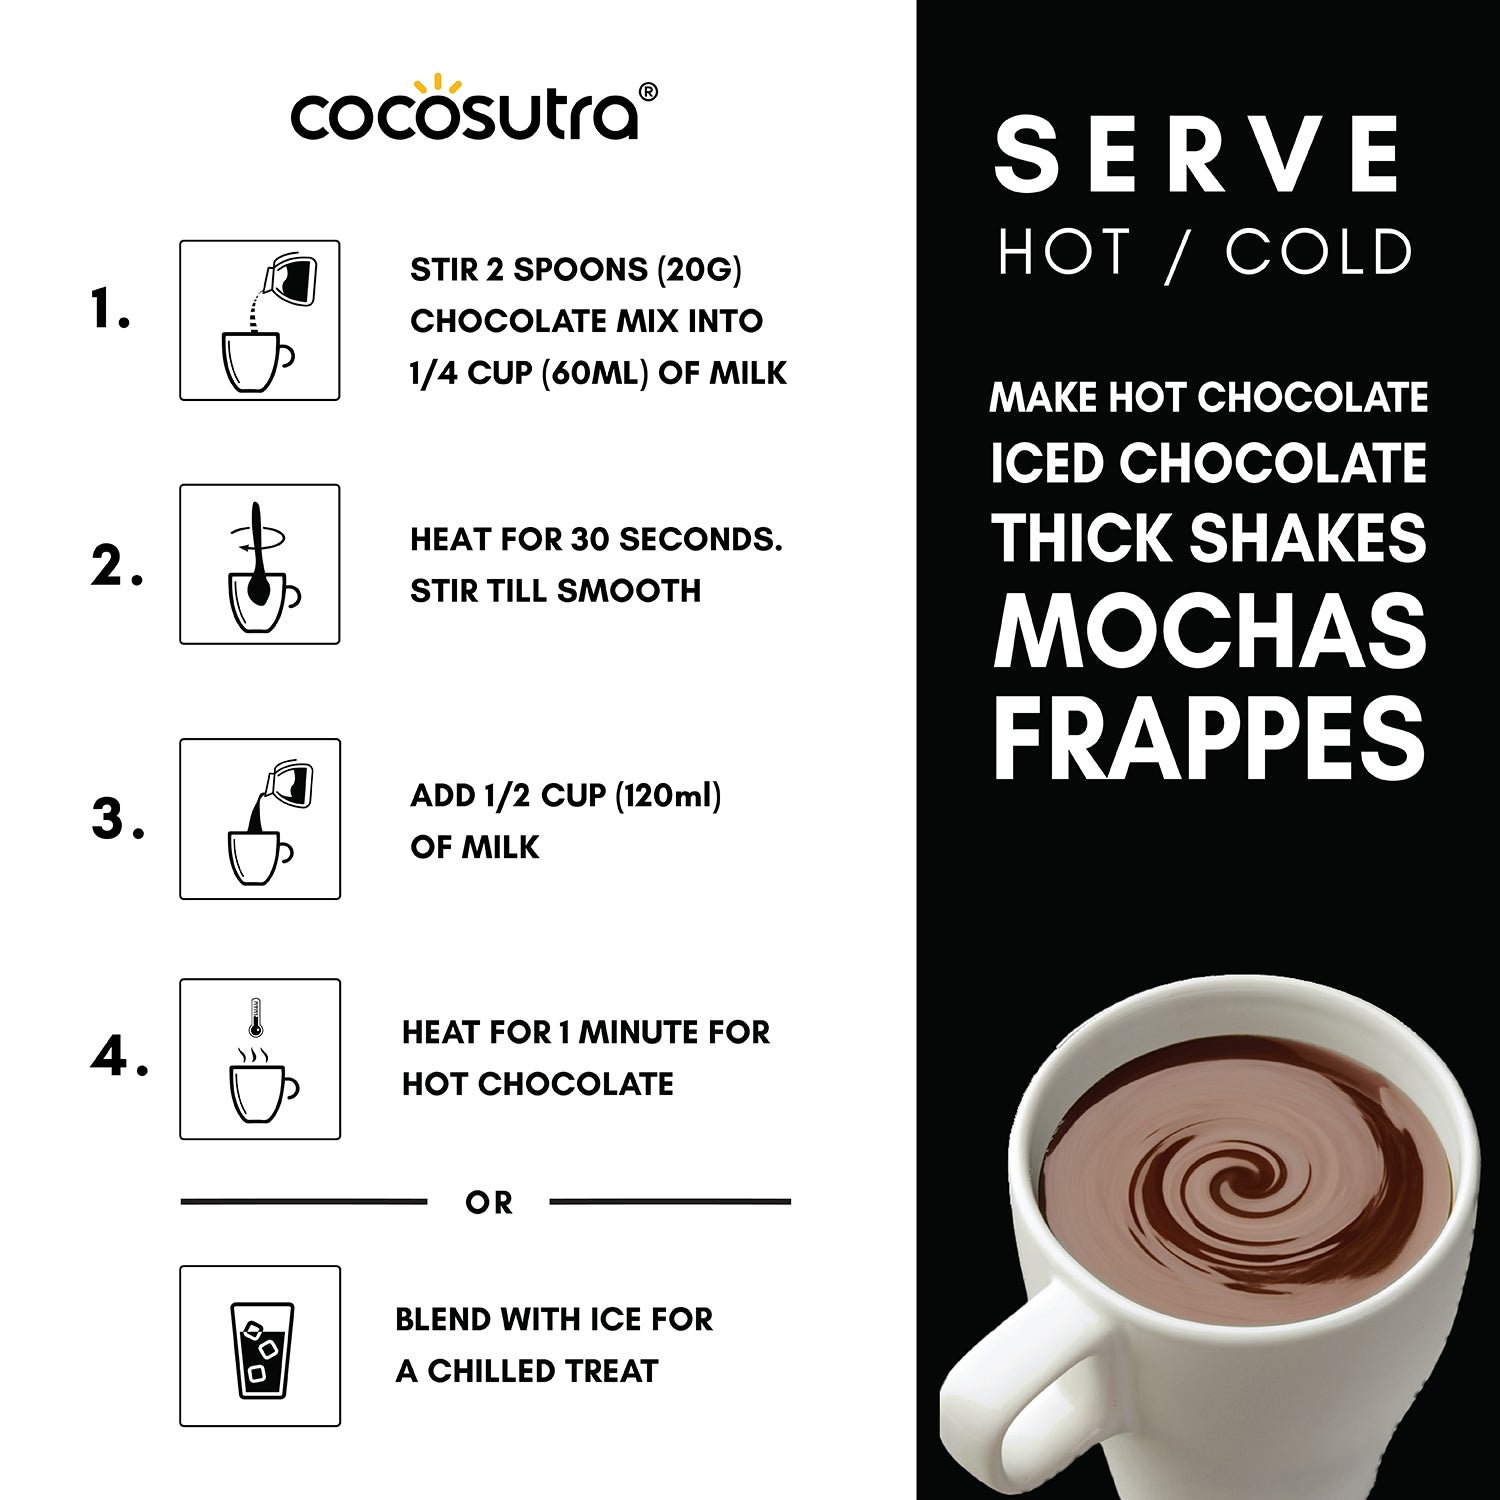 Cocosutra Hot Chocolate Recipe Instructions